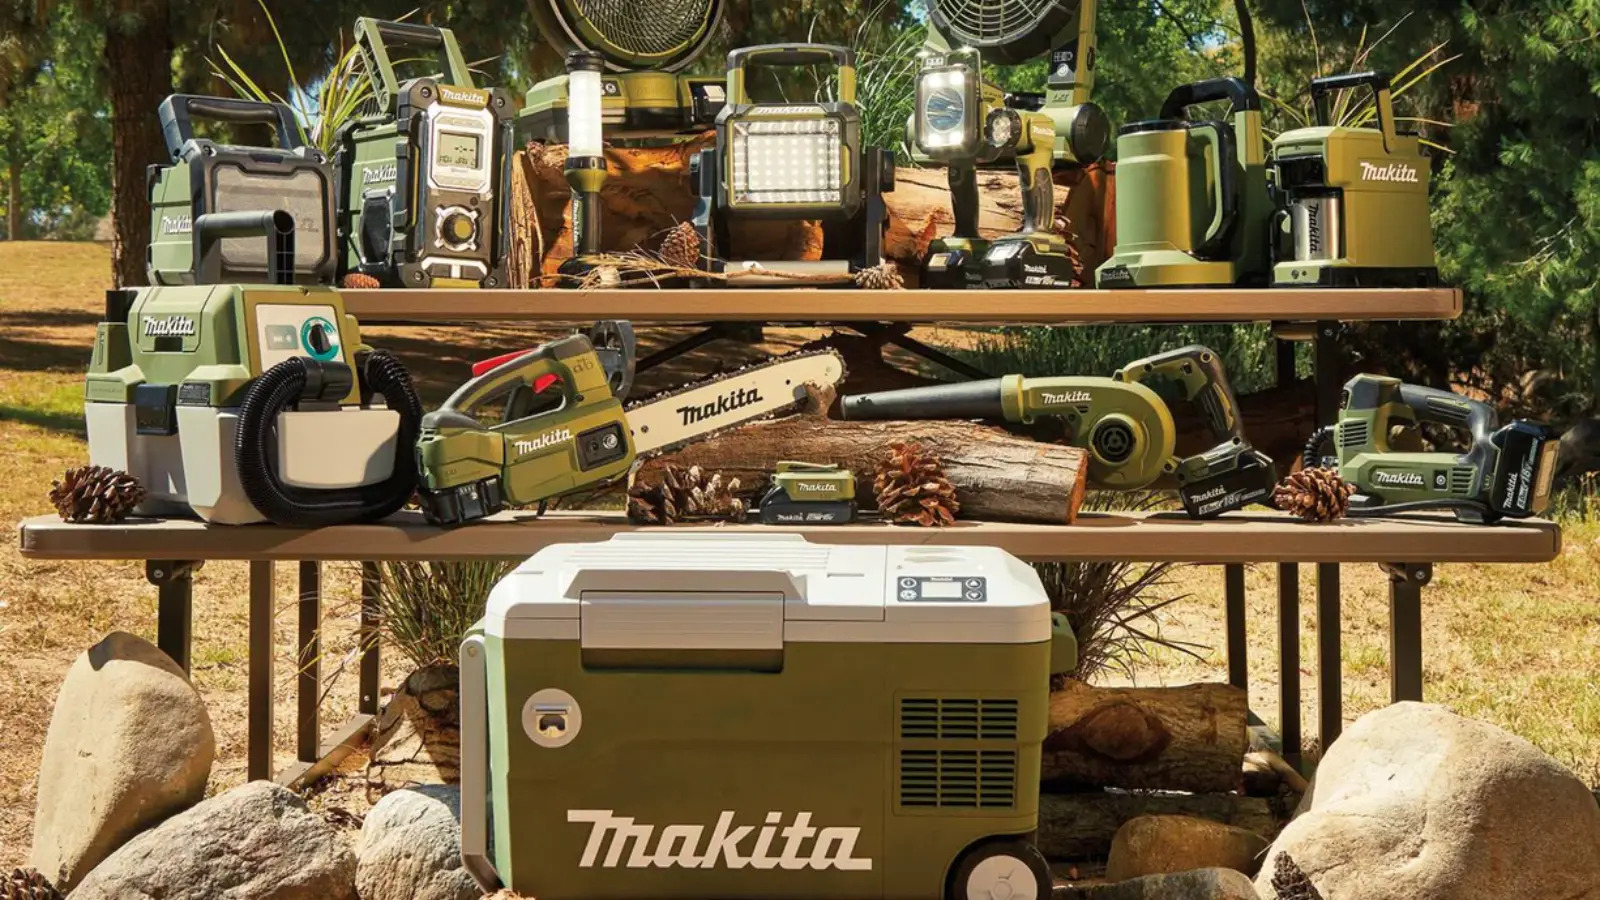 https://www.slashgear.com/img/gallery/these-makita-outdoor-adventure-products-will-help-level-up-your-next-camping-trip/l-intro-1702940734.jpg